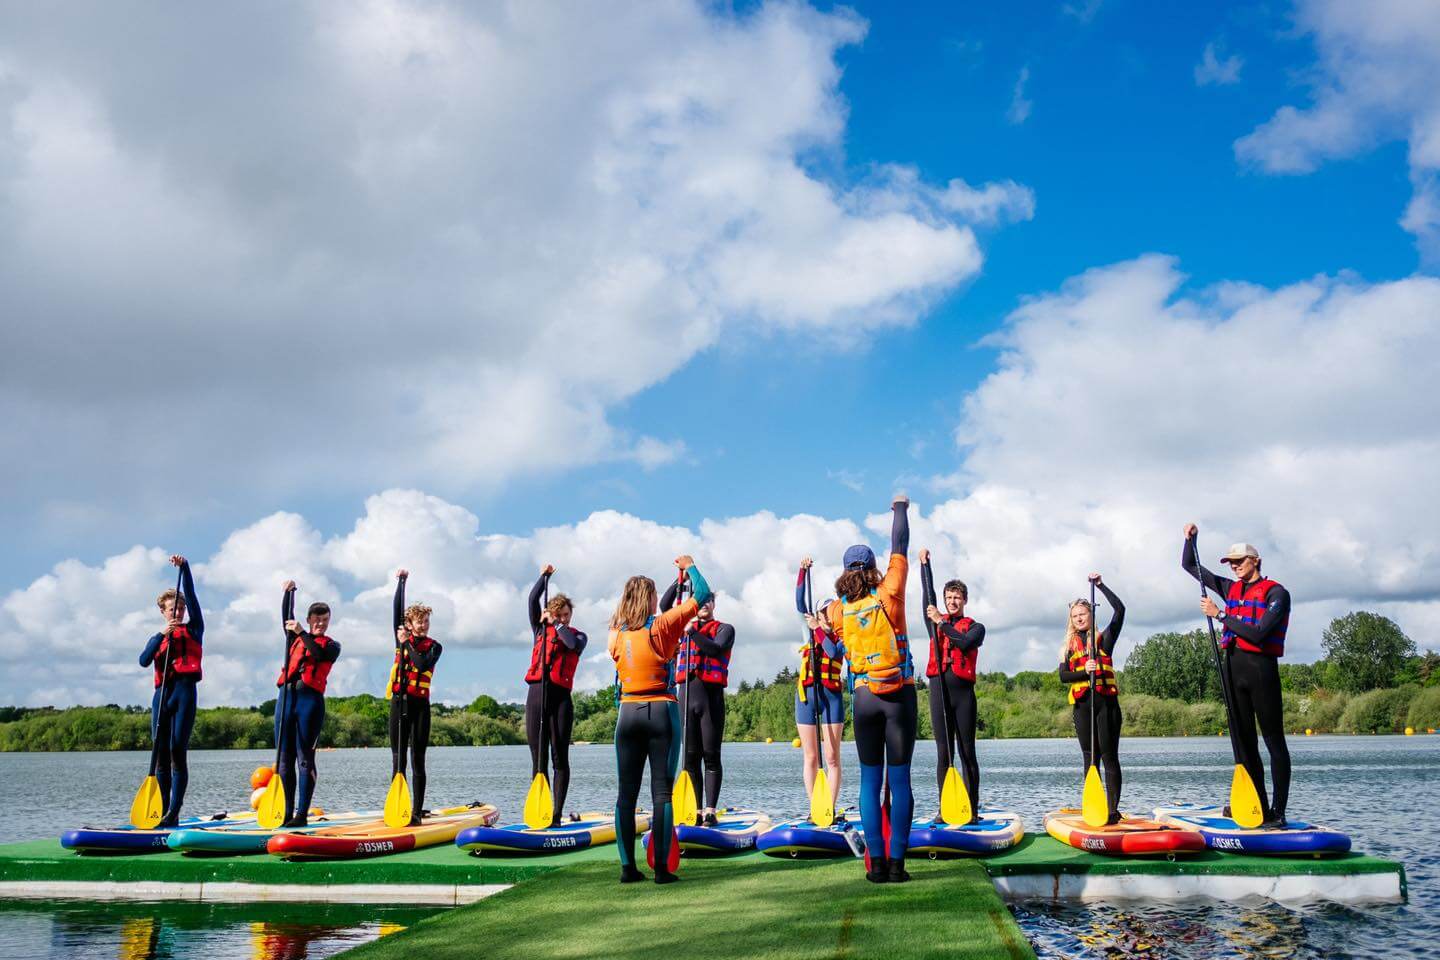 People learning to paddle board at Wild Shore Delamere in Cheshire, England